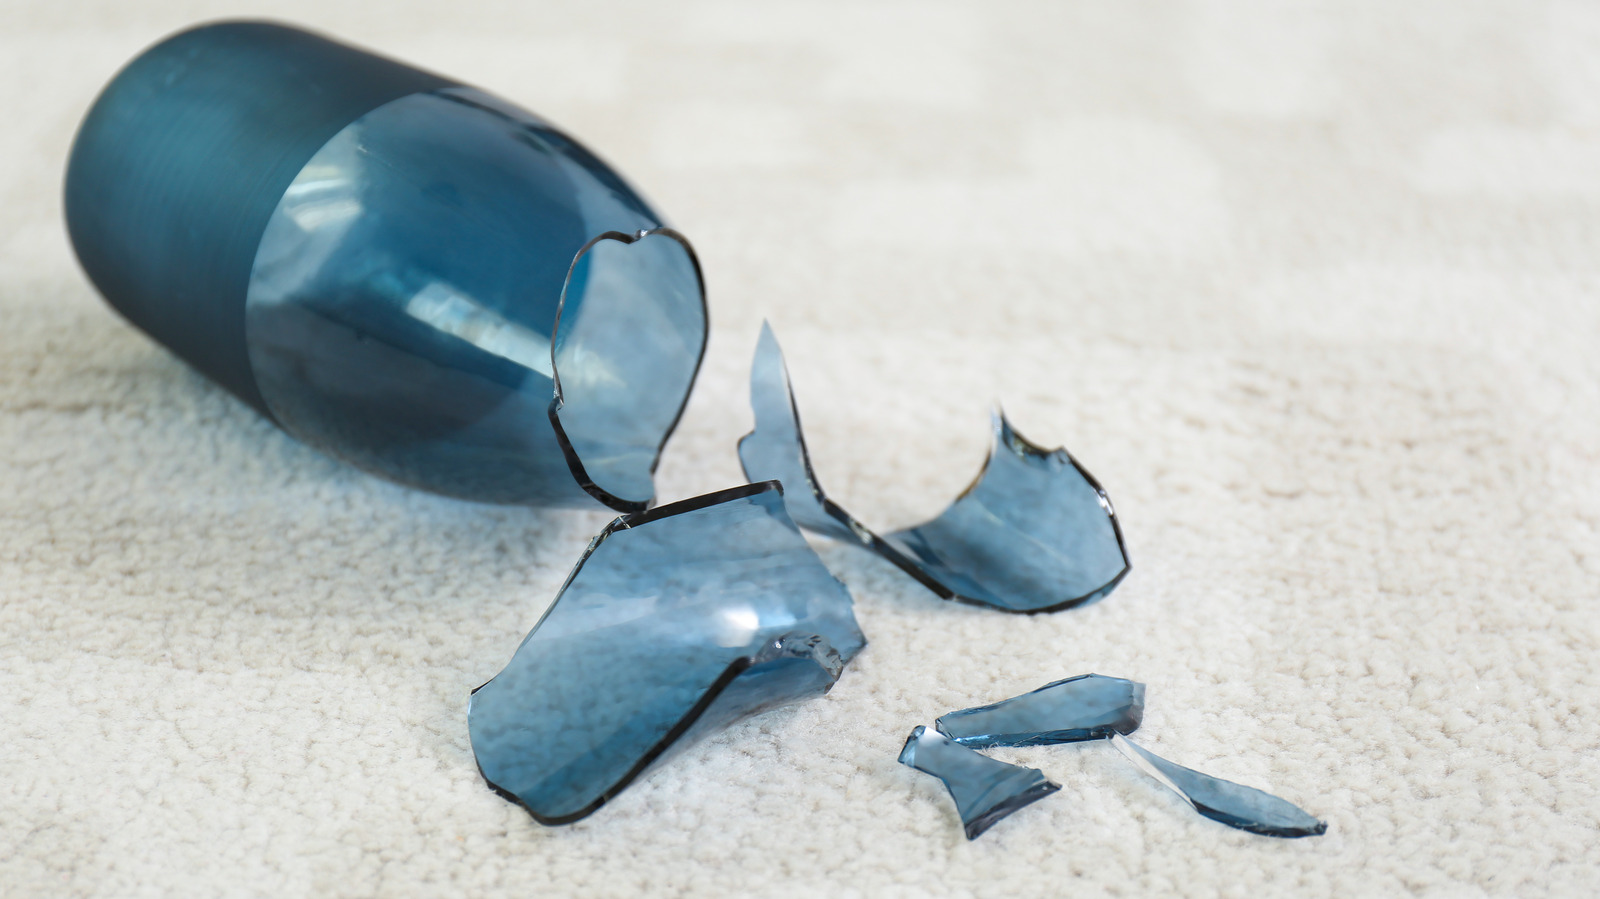 How To Clean Up Broken Glass From A Carpet